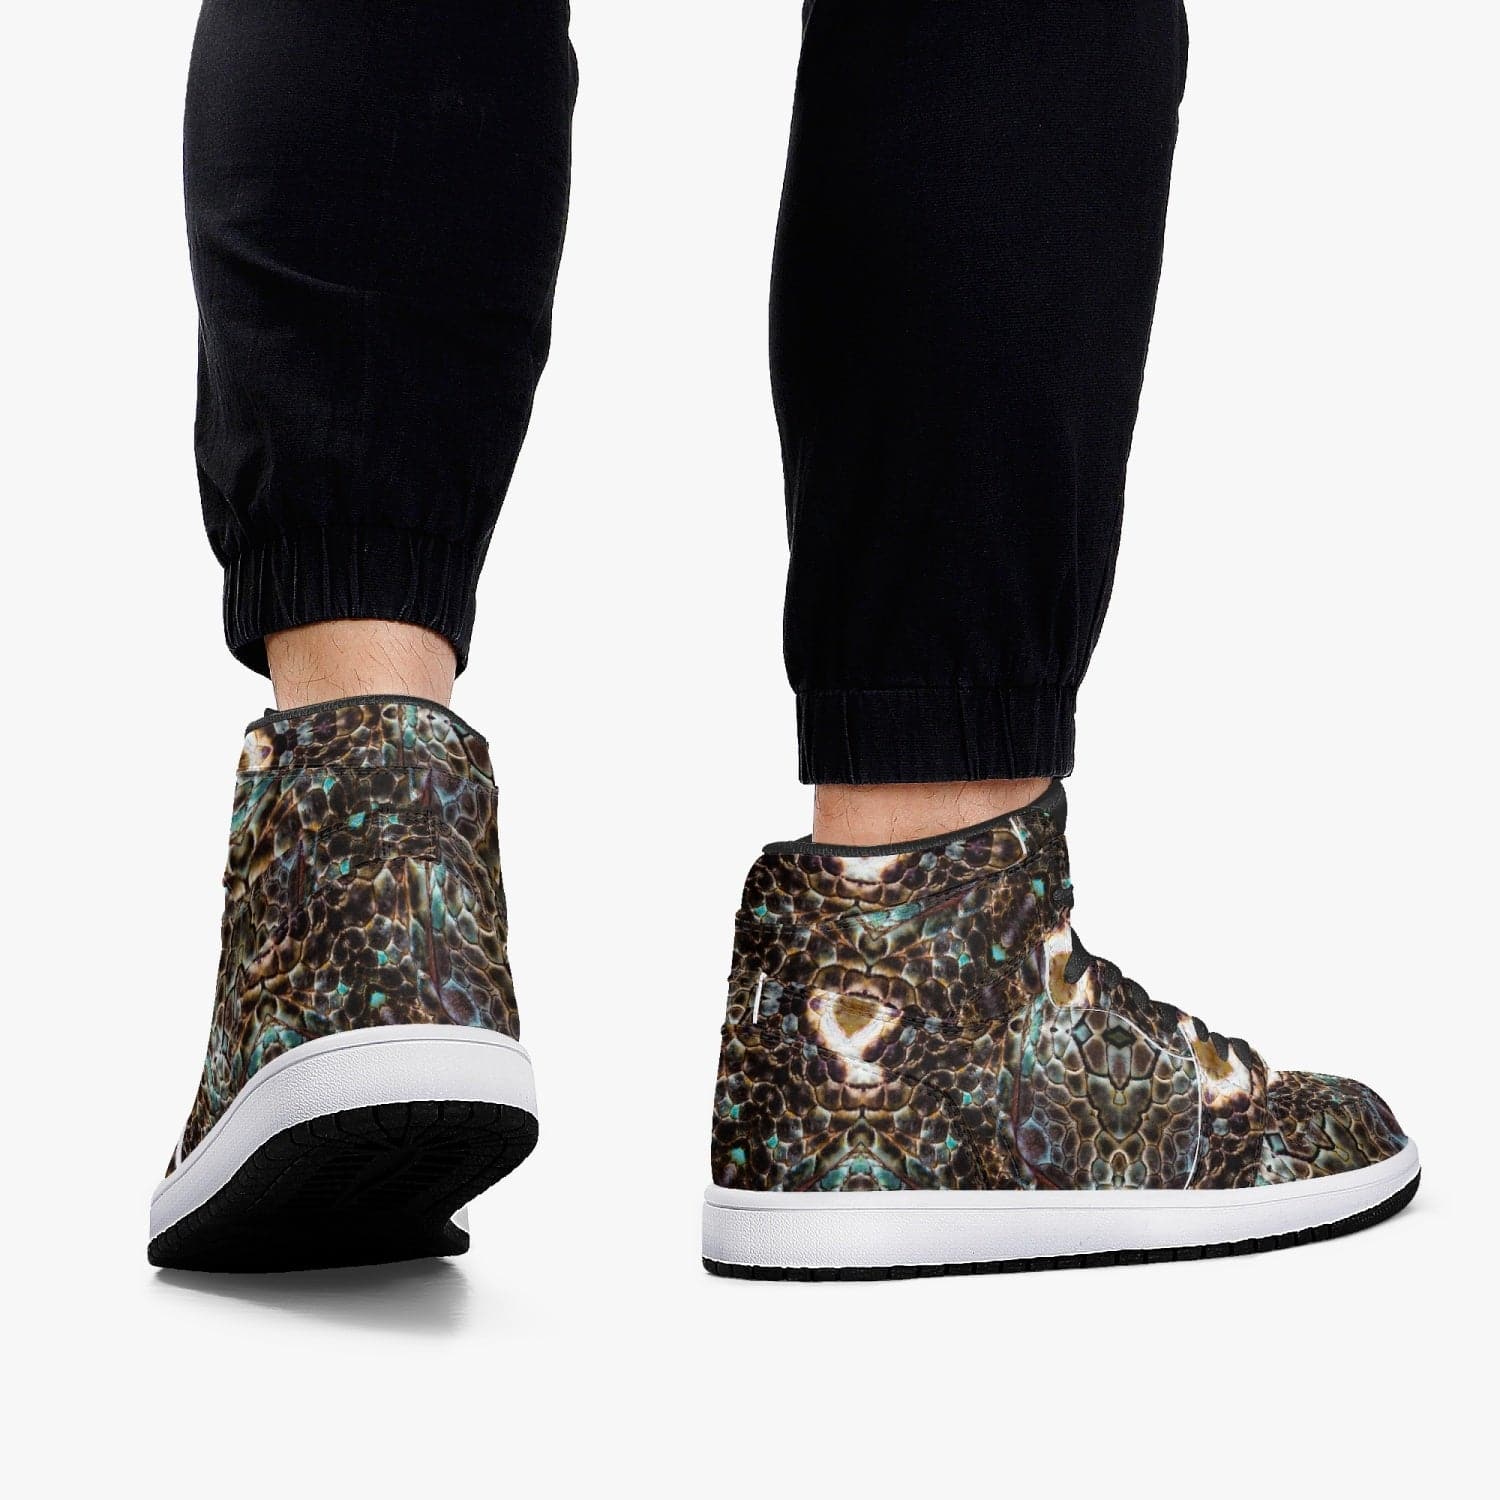 Rattle Snake Kaleidoscope  New Black High-Top Leather Sneakers for Men, by Sensus Studio Design